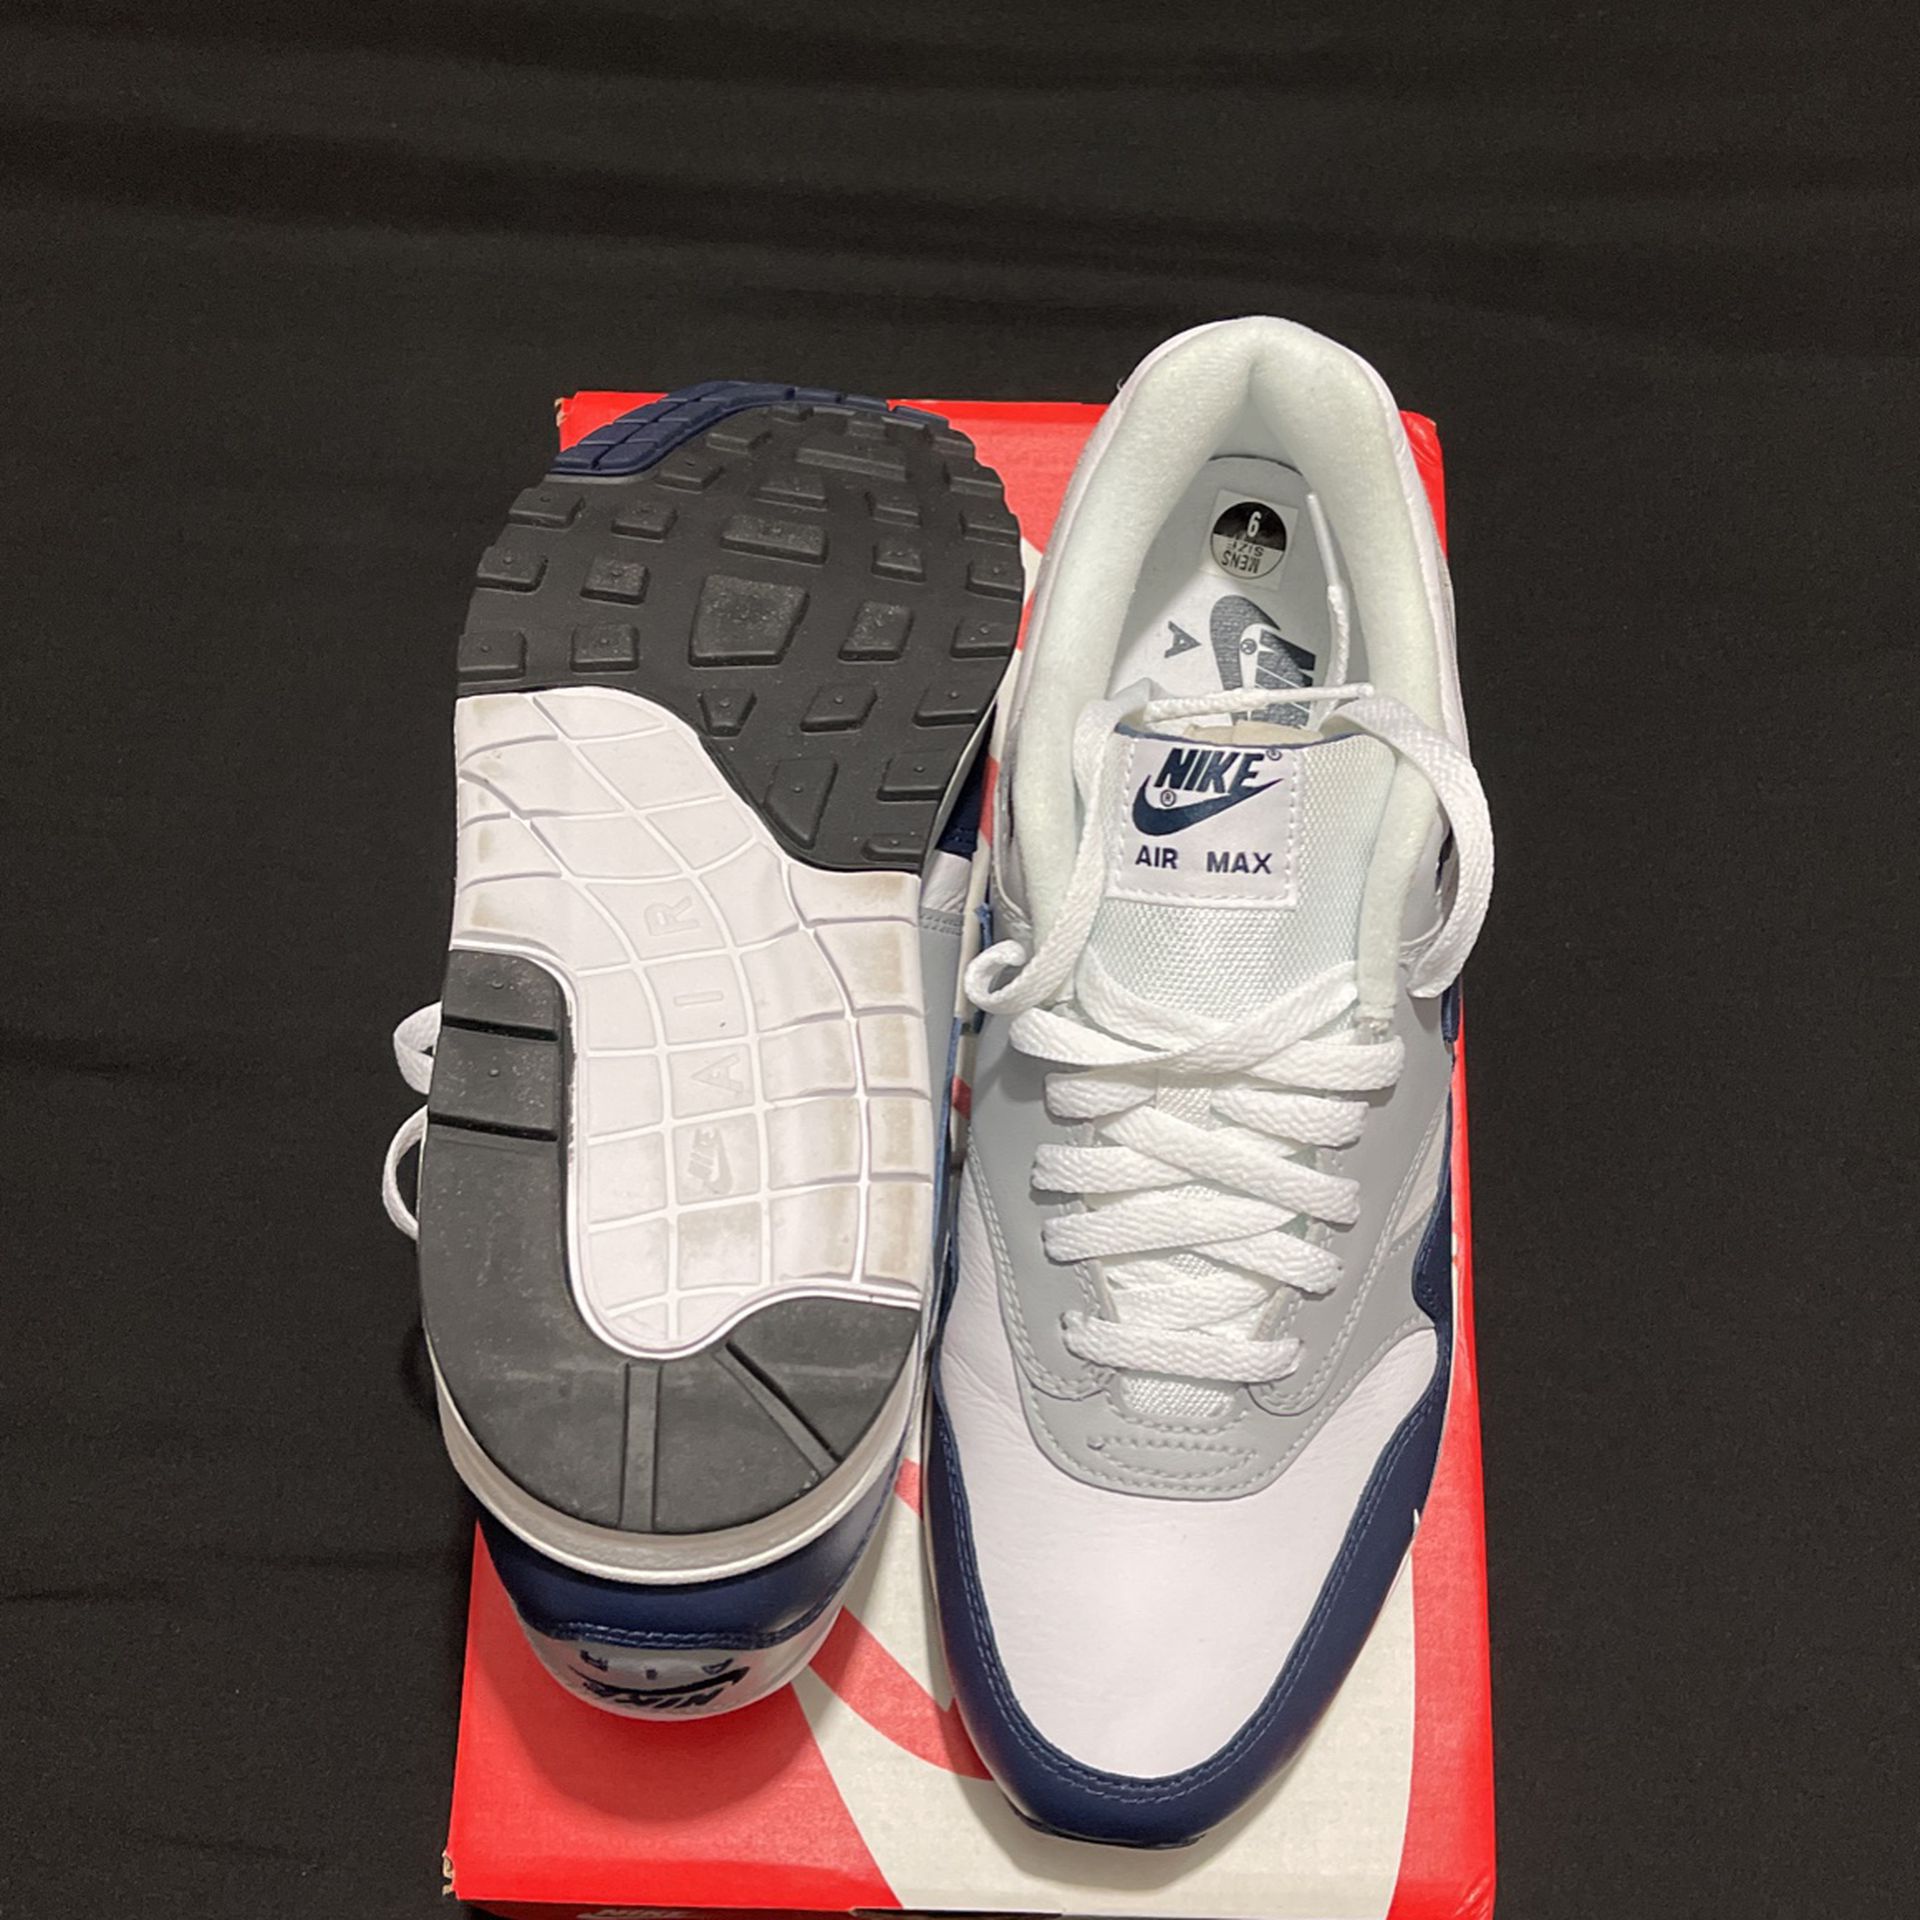 2021 Air Max 1 LV8 Obsidian for Sale in Fresno, CA - OfferUp